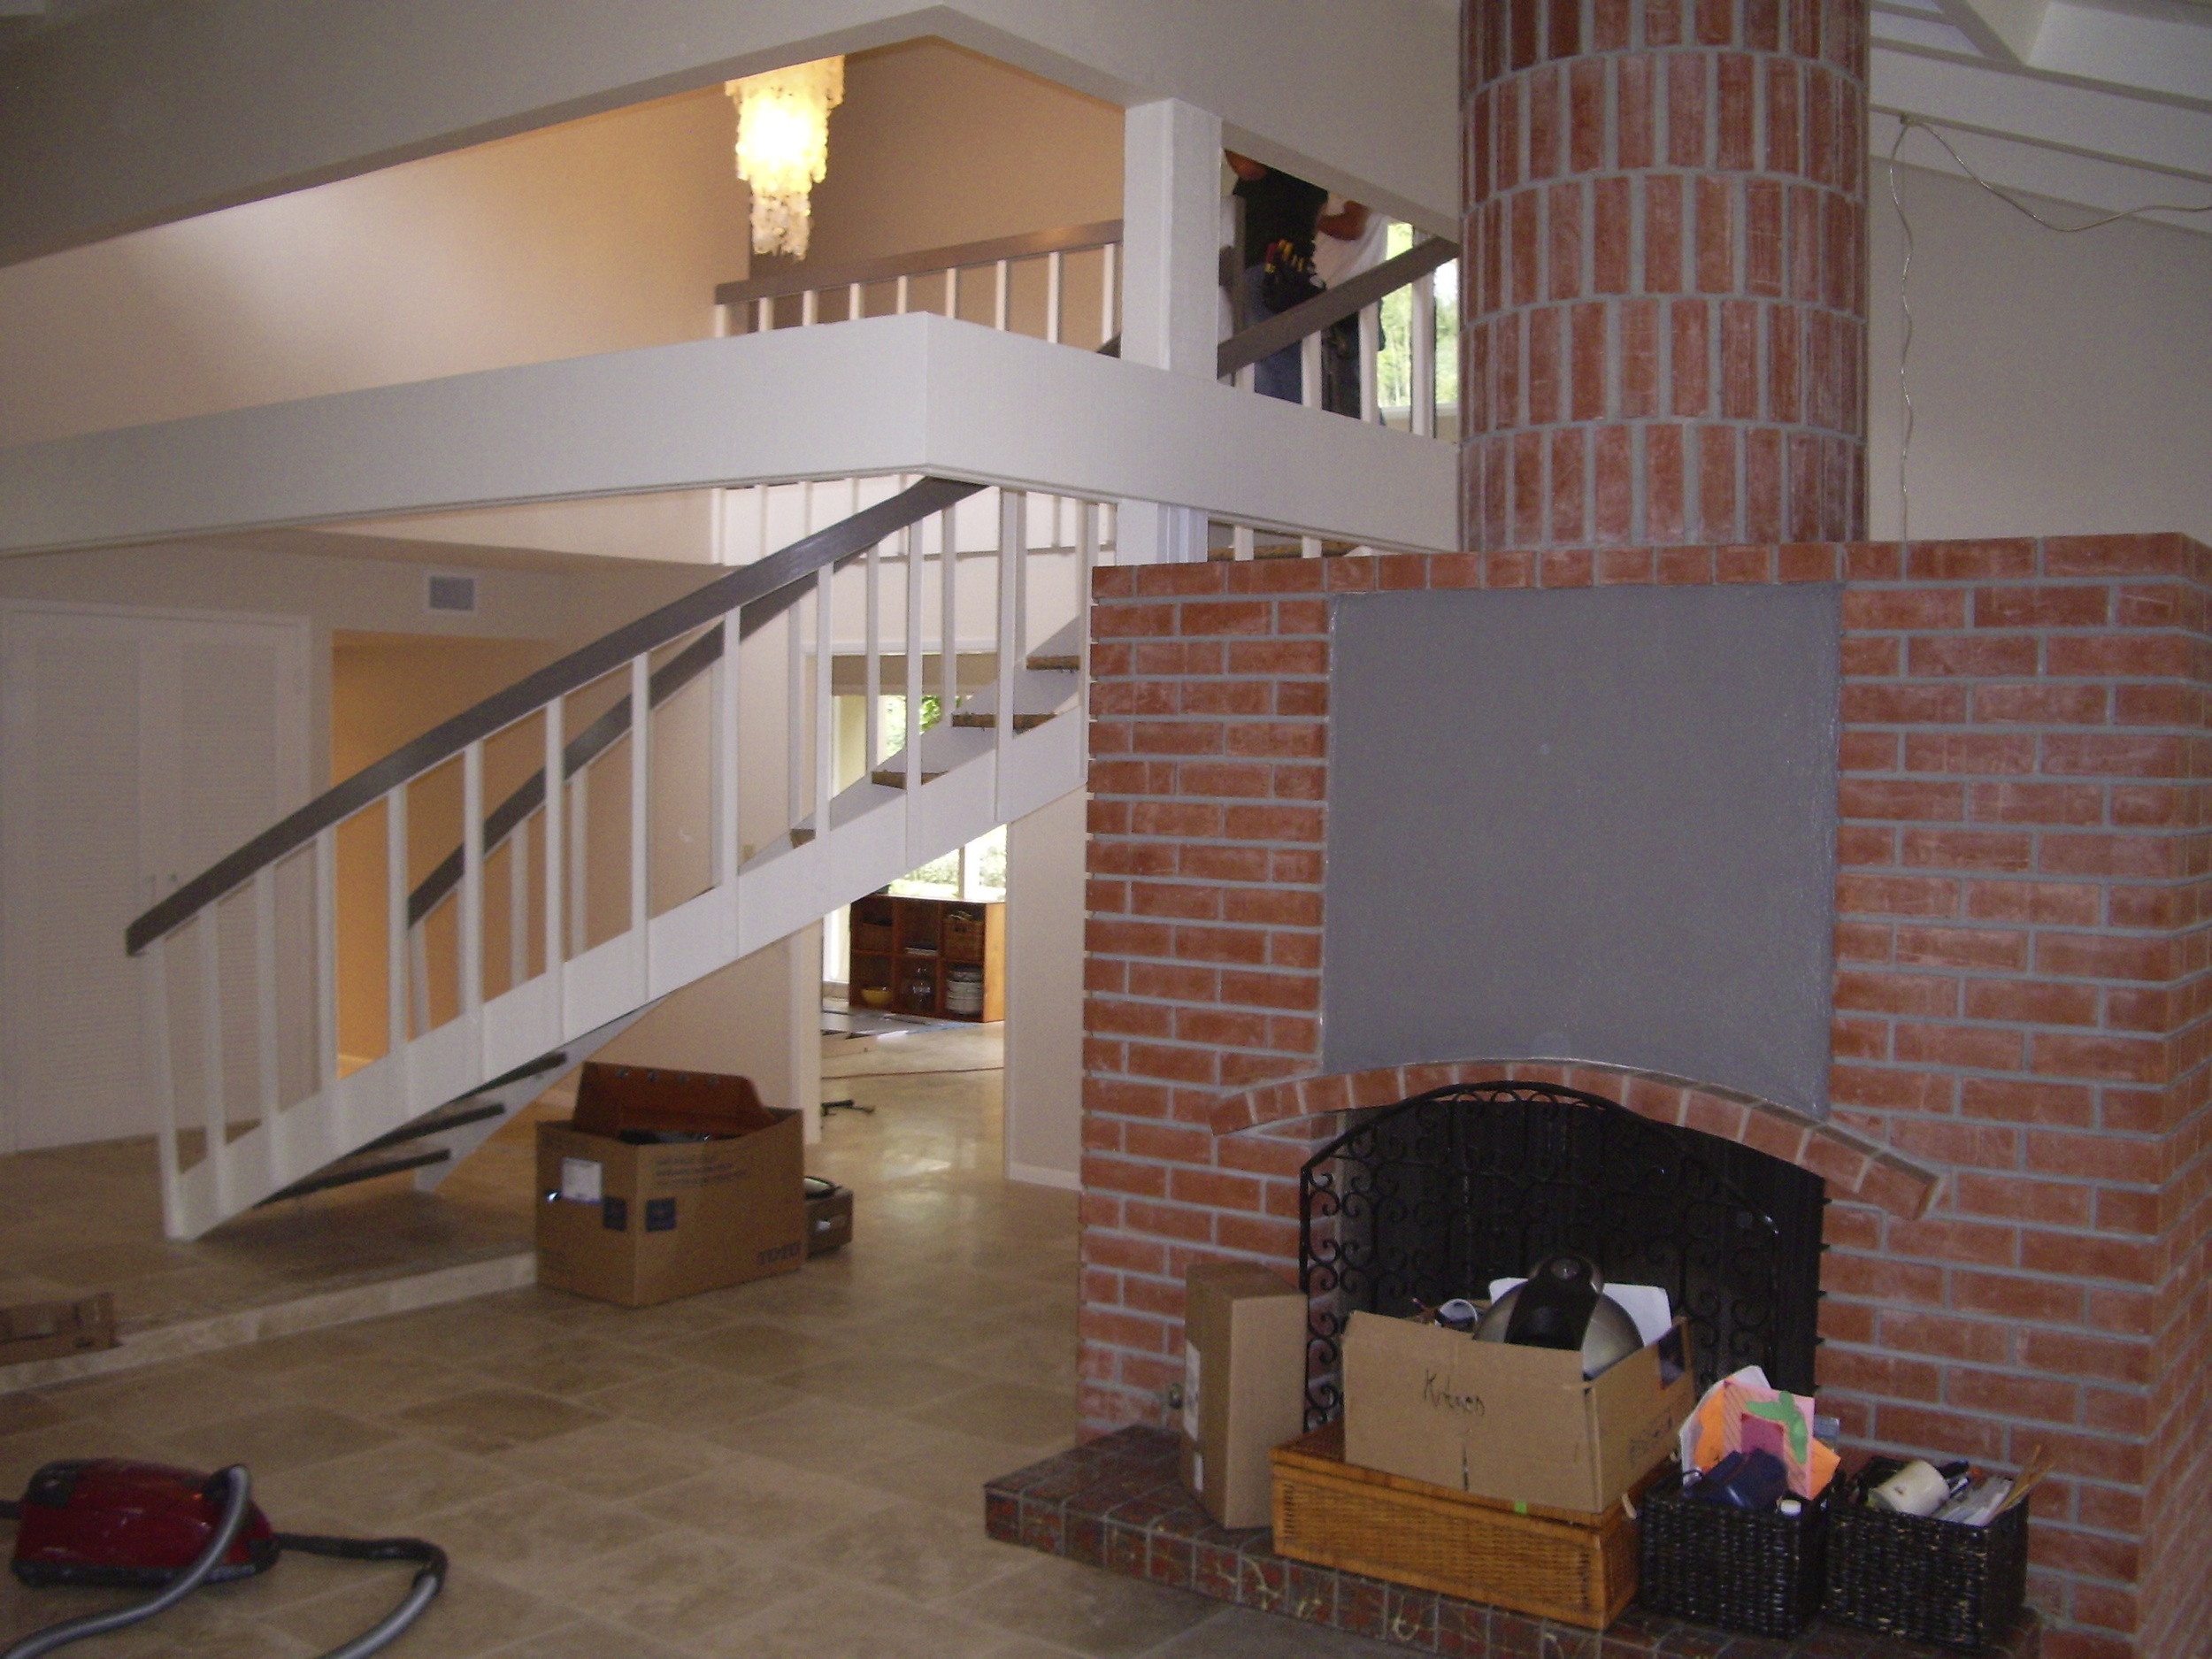  After: The only change to the fireplace was painting the white stucco. Note the great round chimney. All flooring on first floor is&nbsp;18x18 travertine. 